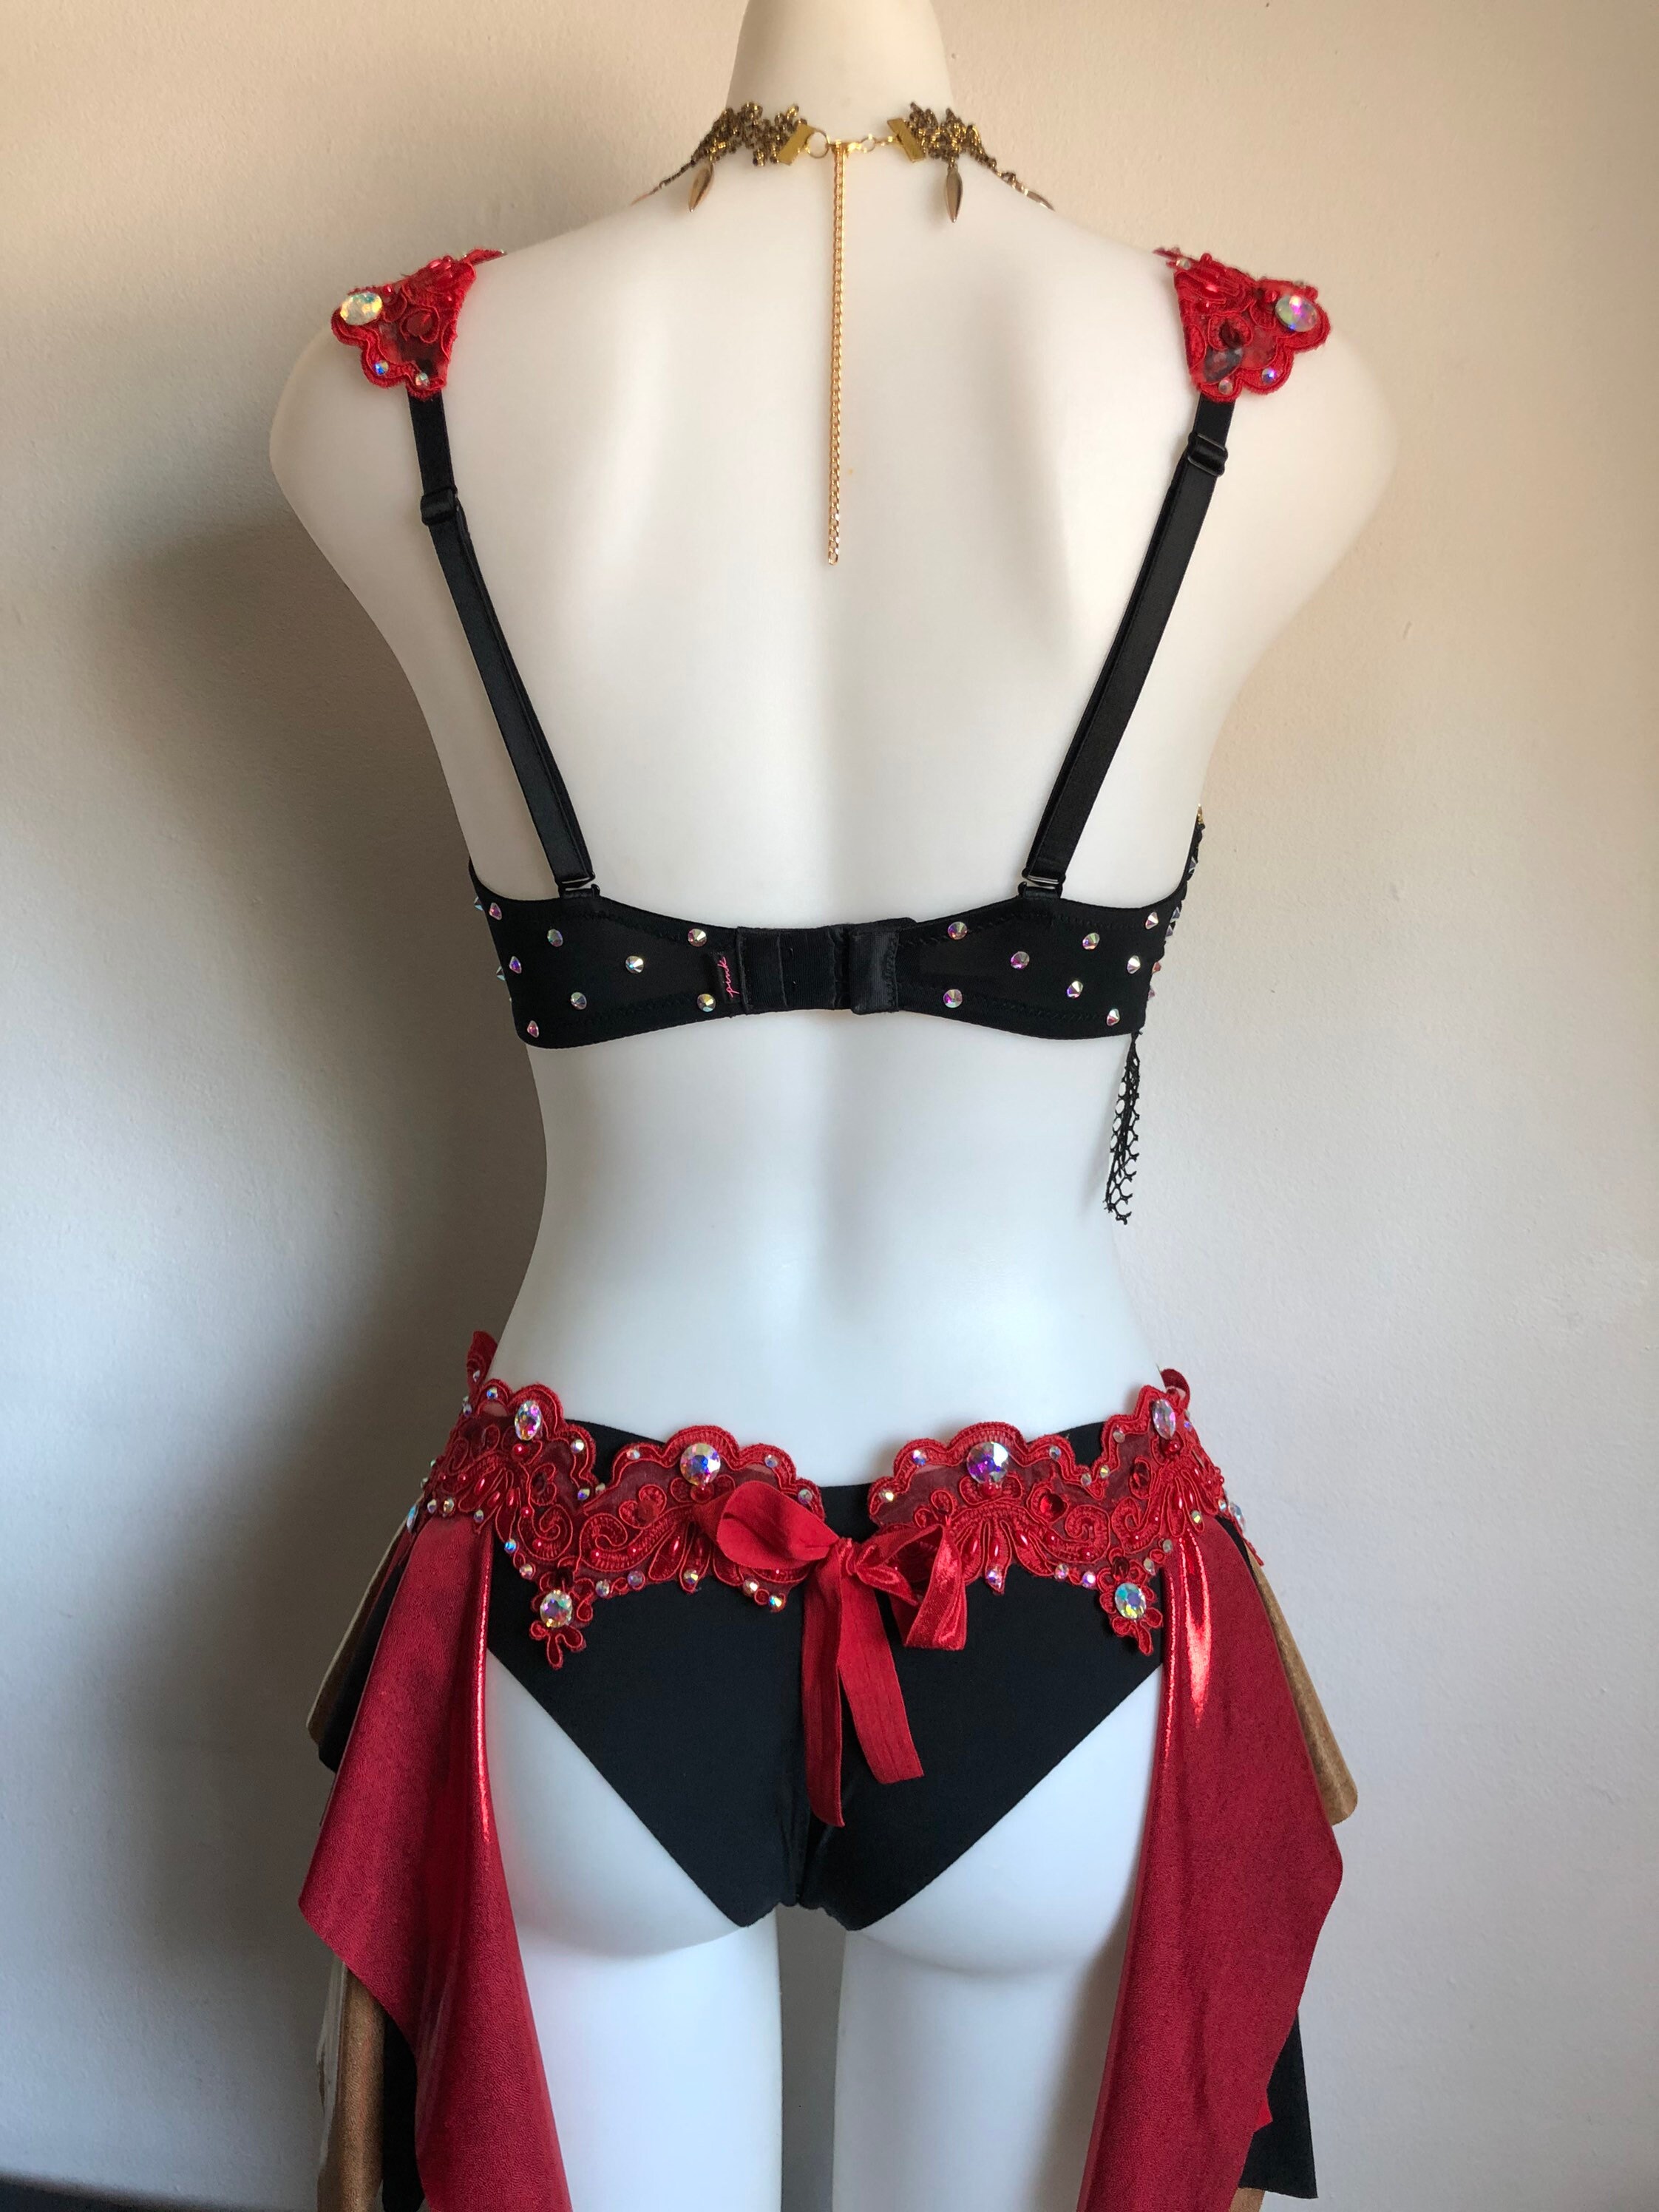 CUSTOM SIZE Sexy Pirate Outfit Womens Adult Costume Rave Bra Festival  Cosplay Halloween EDC Sailor Red Black Gold Ringleader 